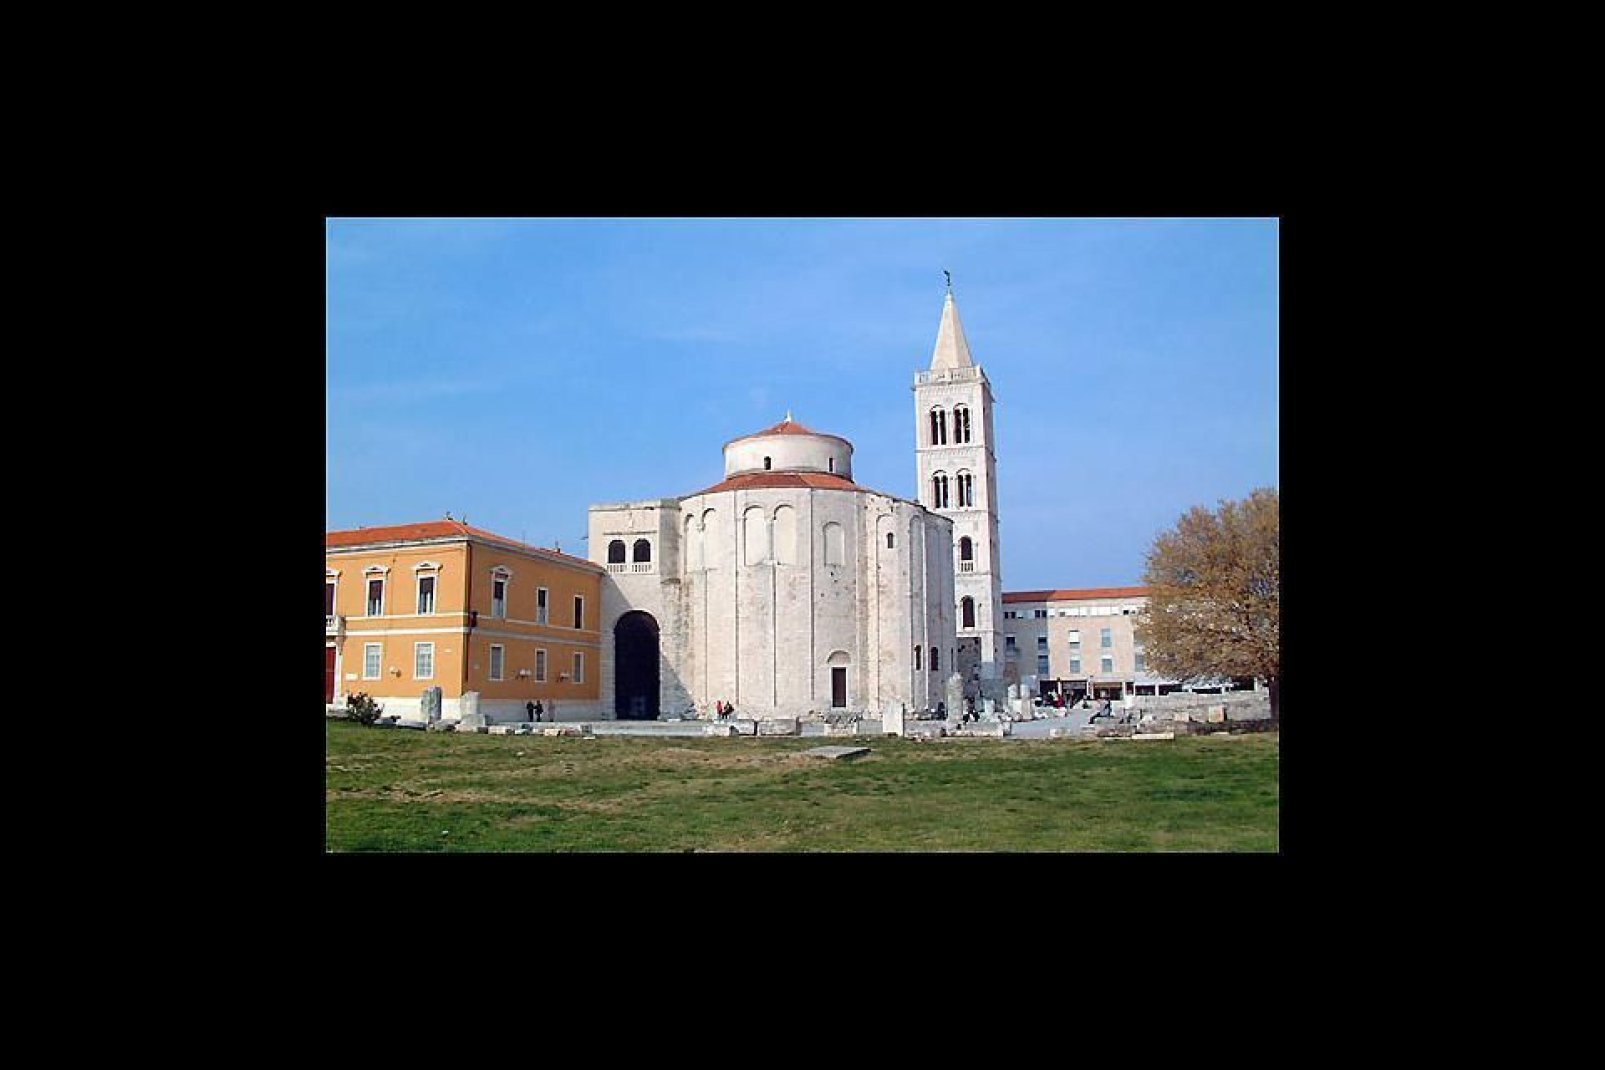 In the old town of Zadar, you'll find historic buildings with their beautiful architecture, such as the 9th century Church of St. Donatus